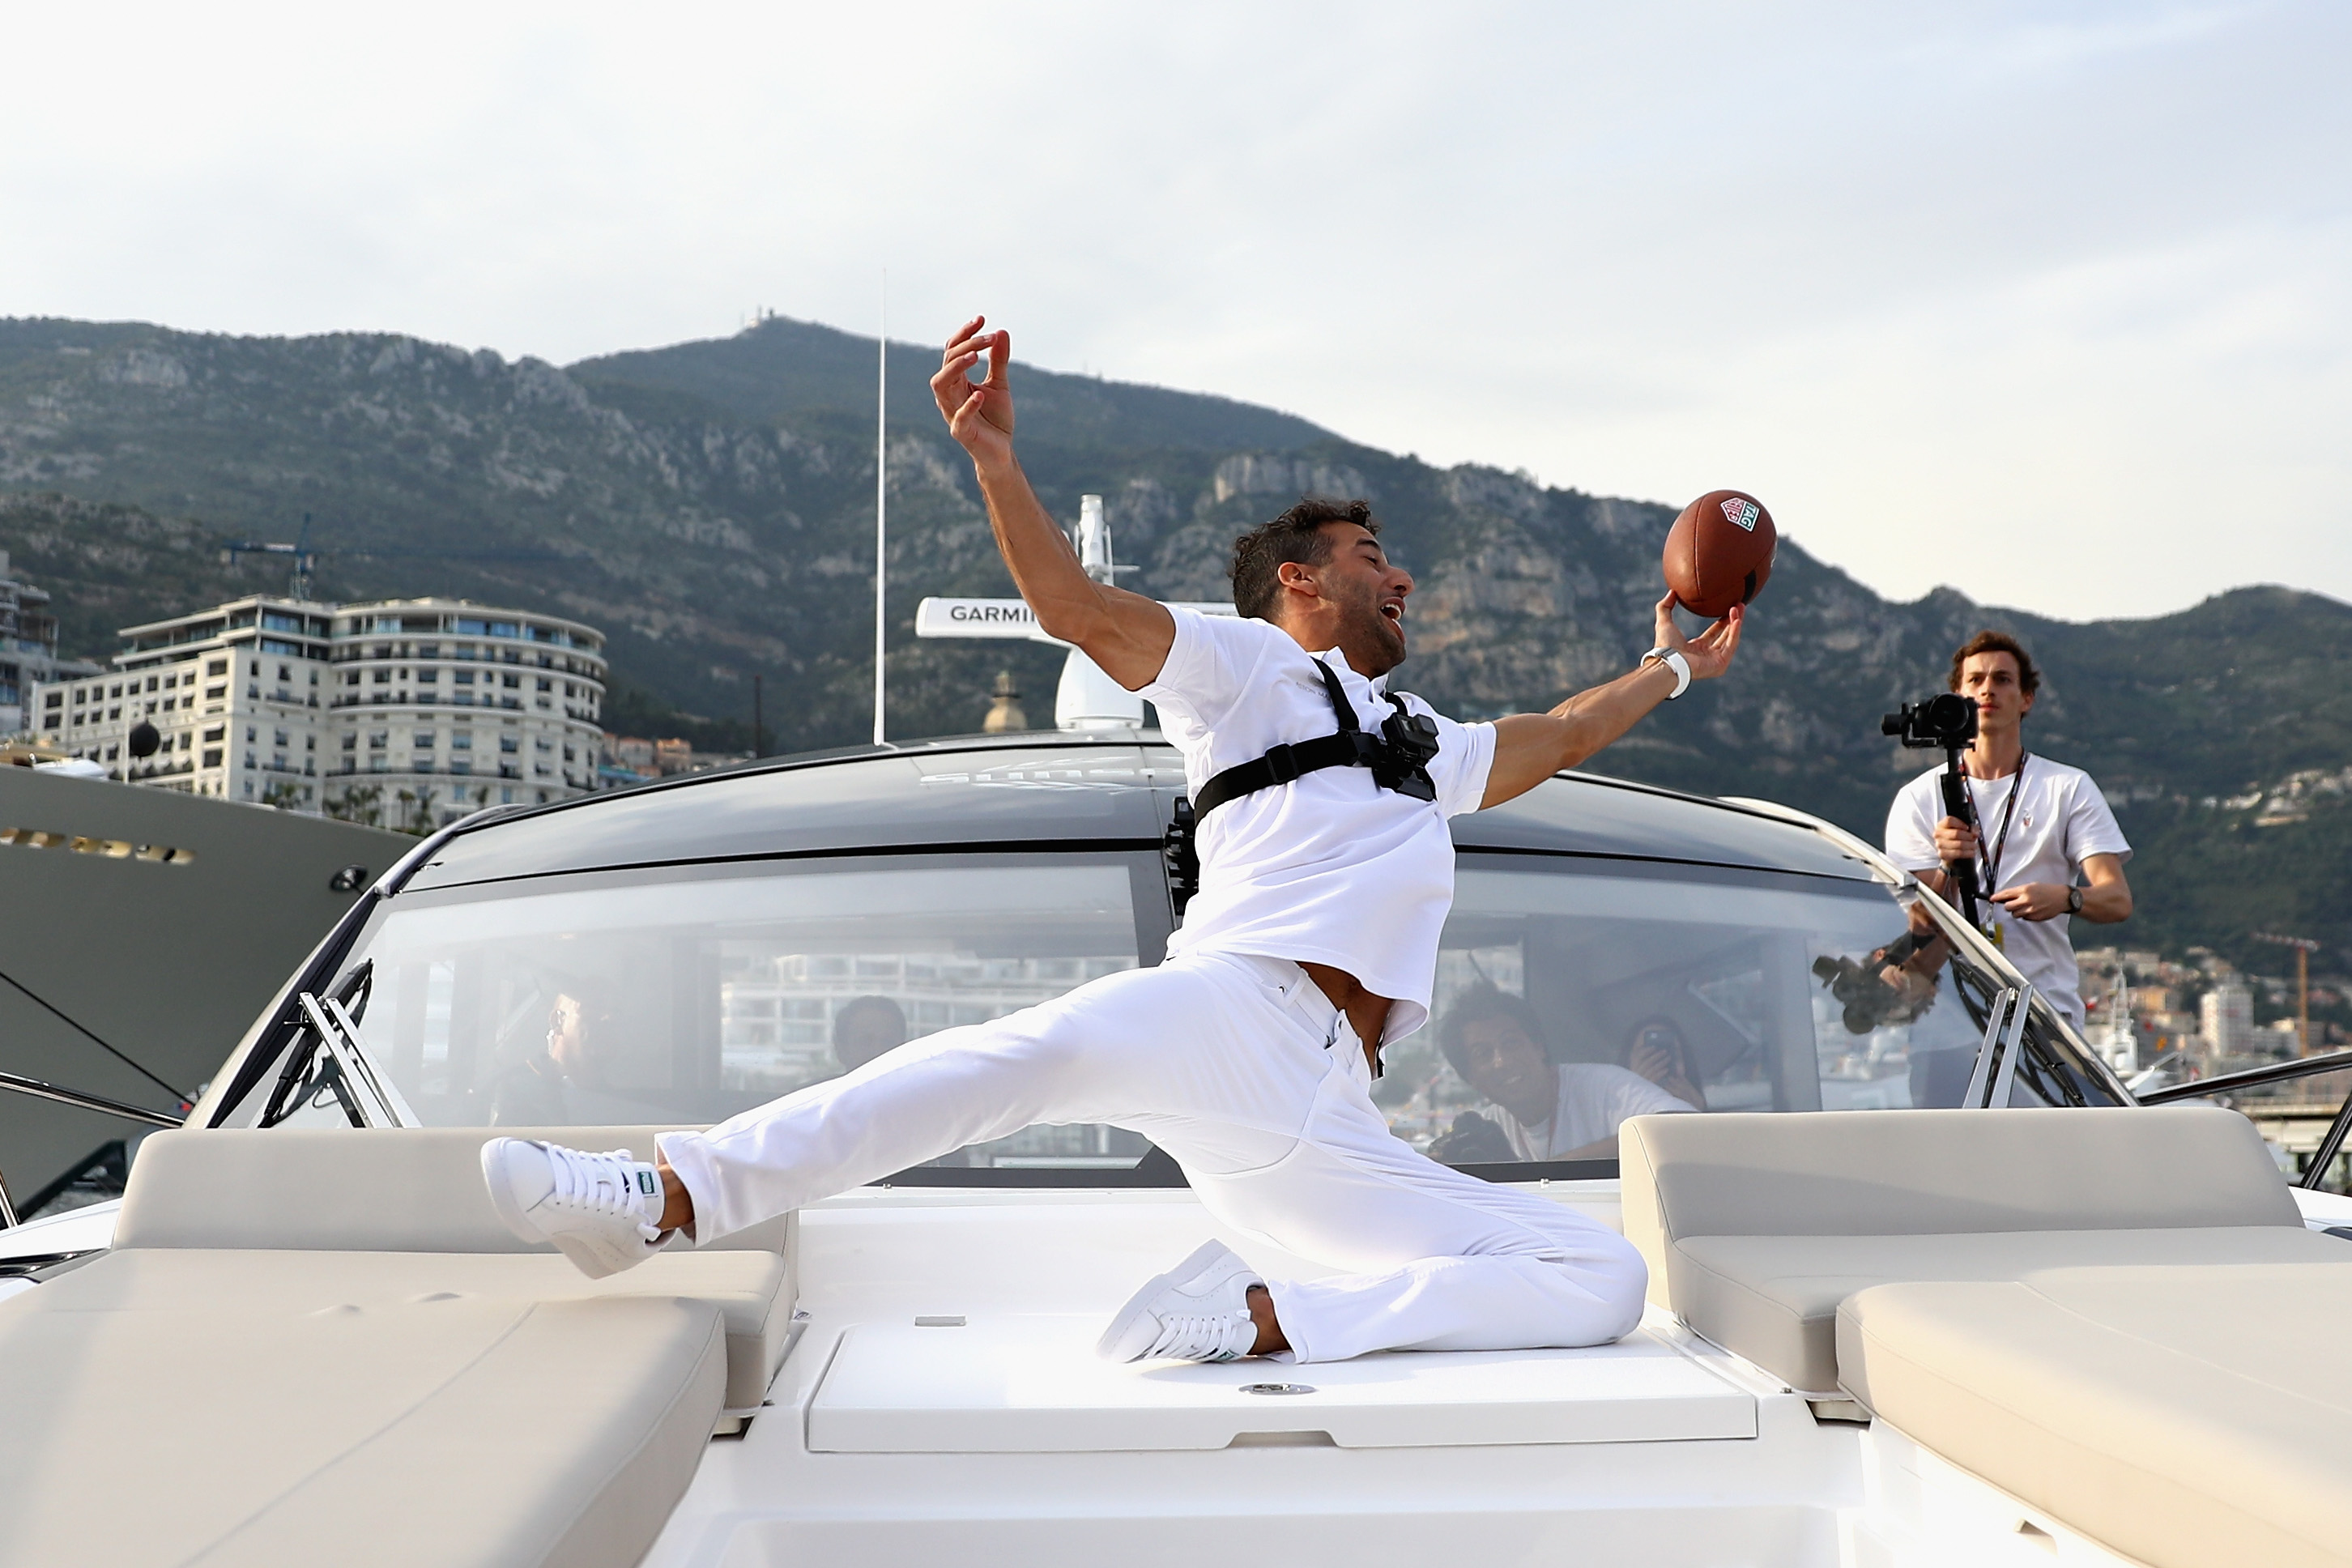 Photos Of Tom Brady On New Yacht Going Viral - The Spun: What's